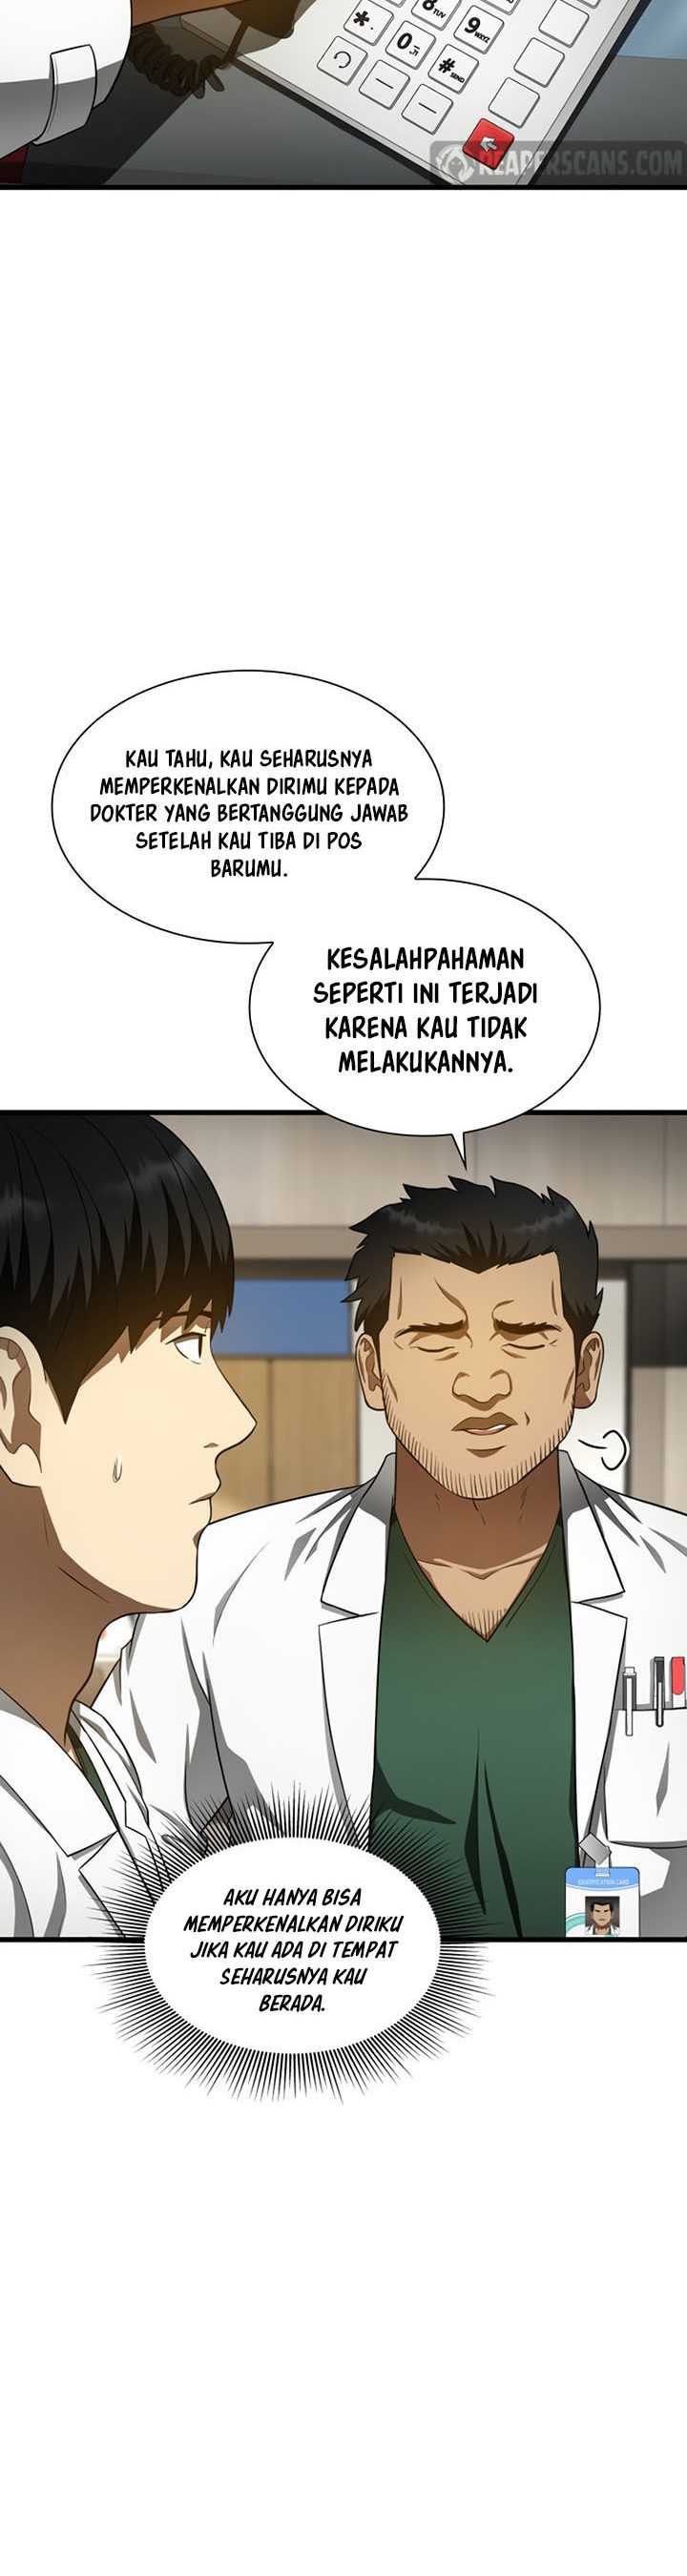 Perfect Surgeon Chapter 49